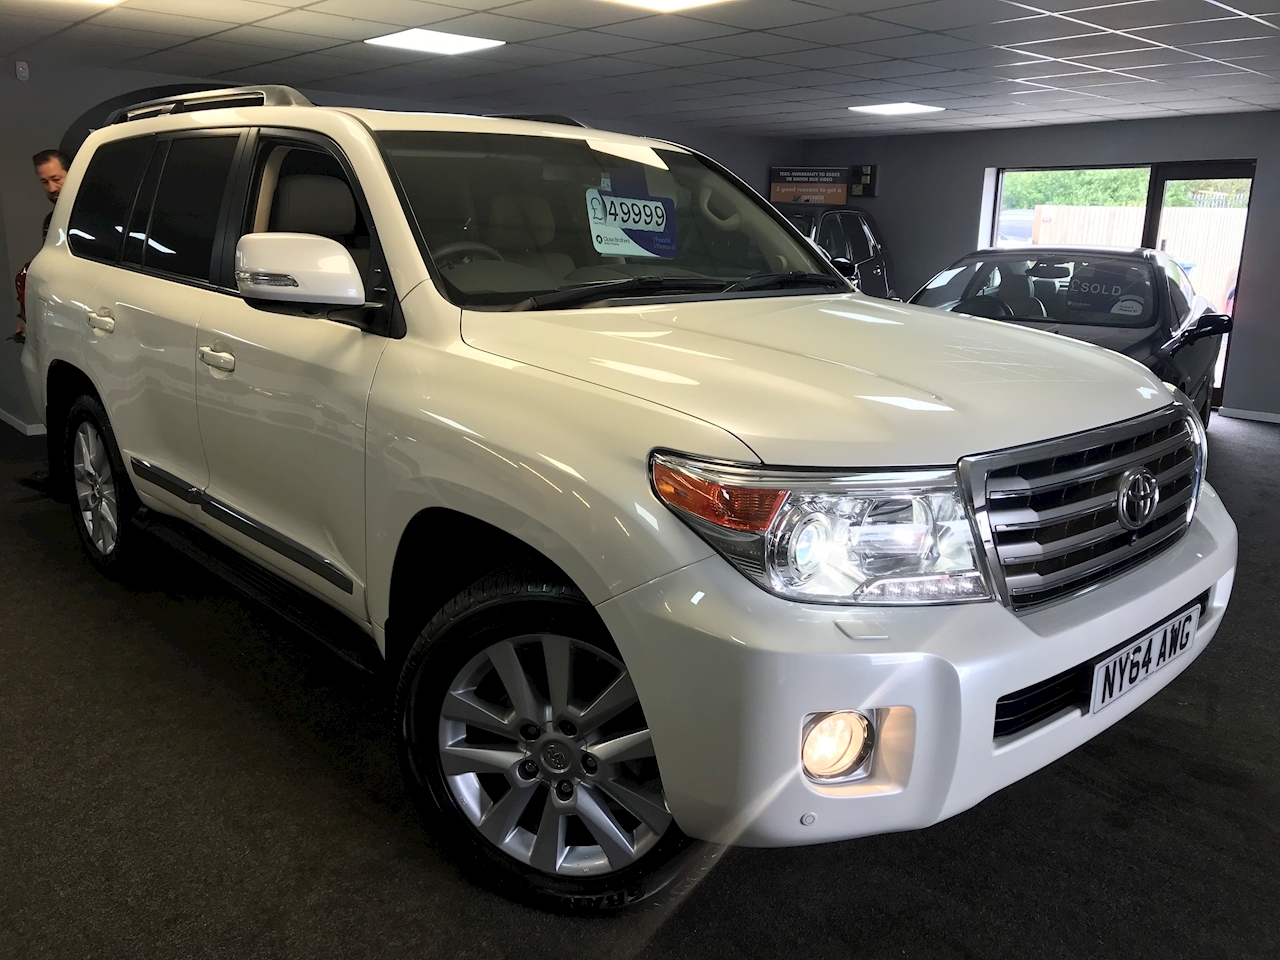 Land Cruiser 4.5 D-4D SUV 5dr Diesel Automatic 4x4 (TPMS) (250 g/km, 272 bhp) 4.5 5dr SUV Automatic Diesel